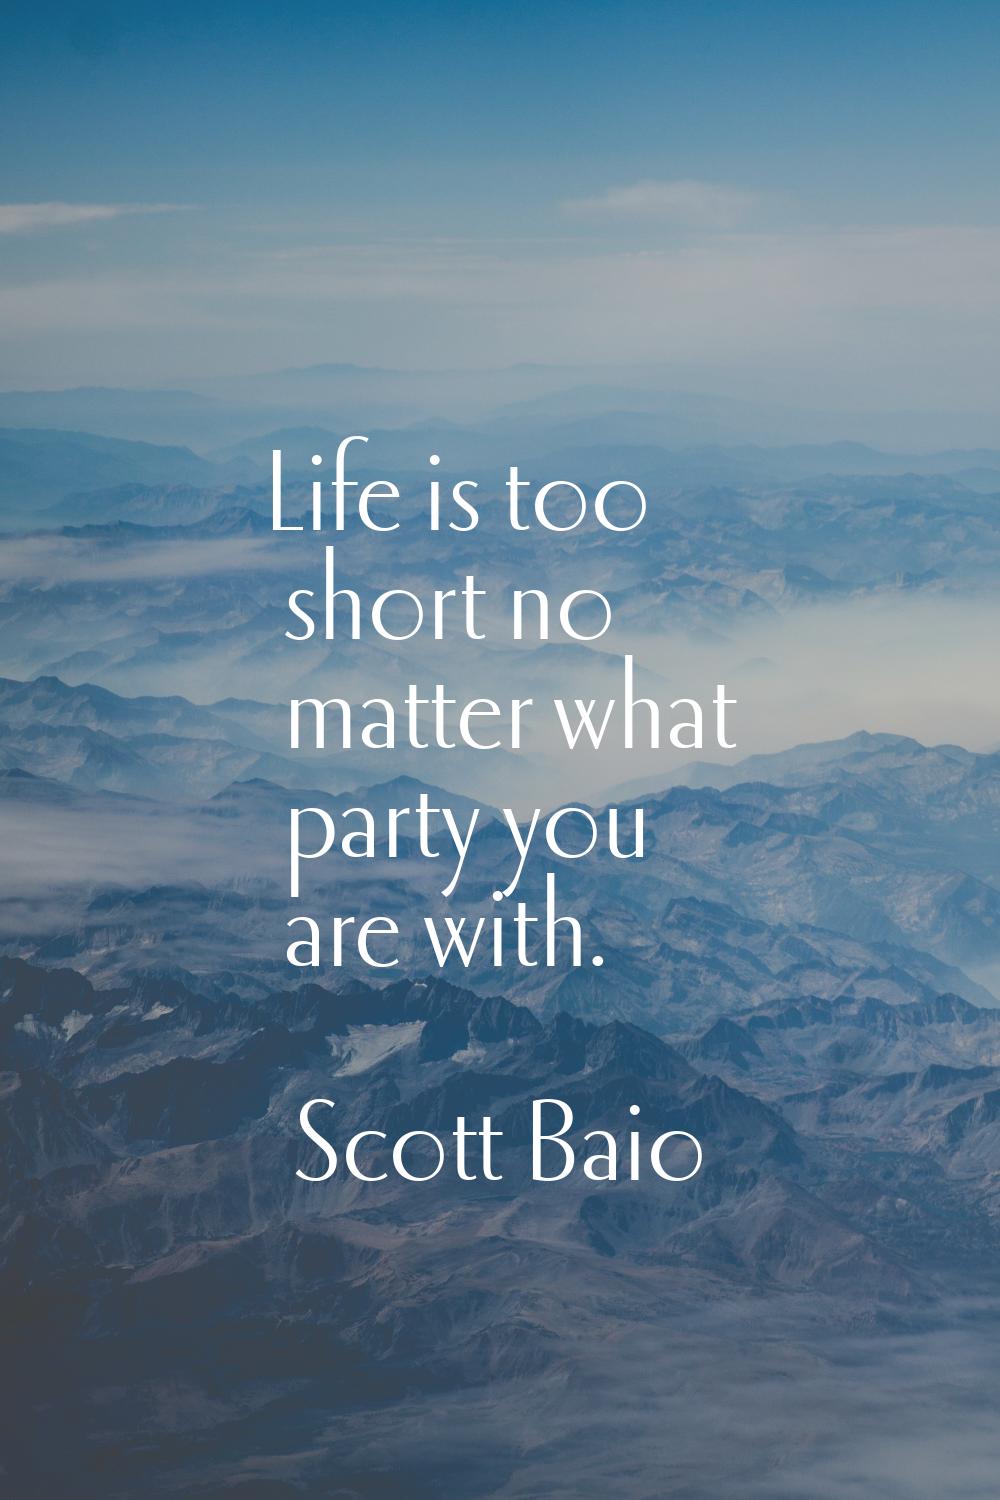 Life is too short no matter what party you are with.